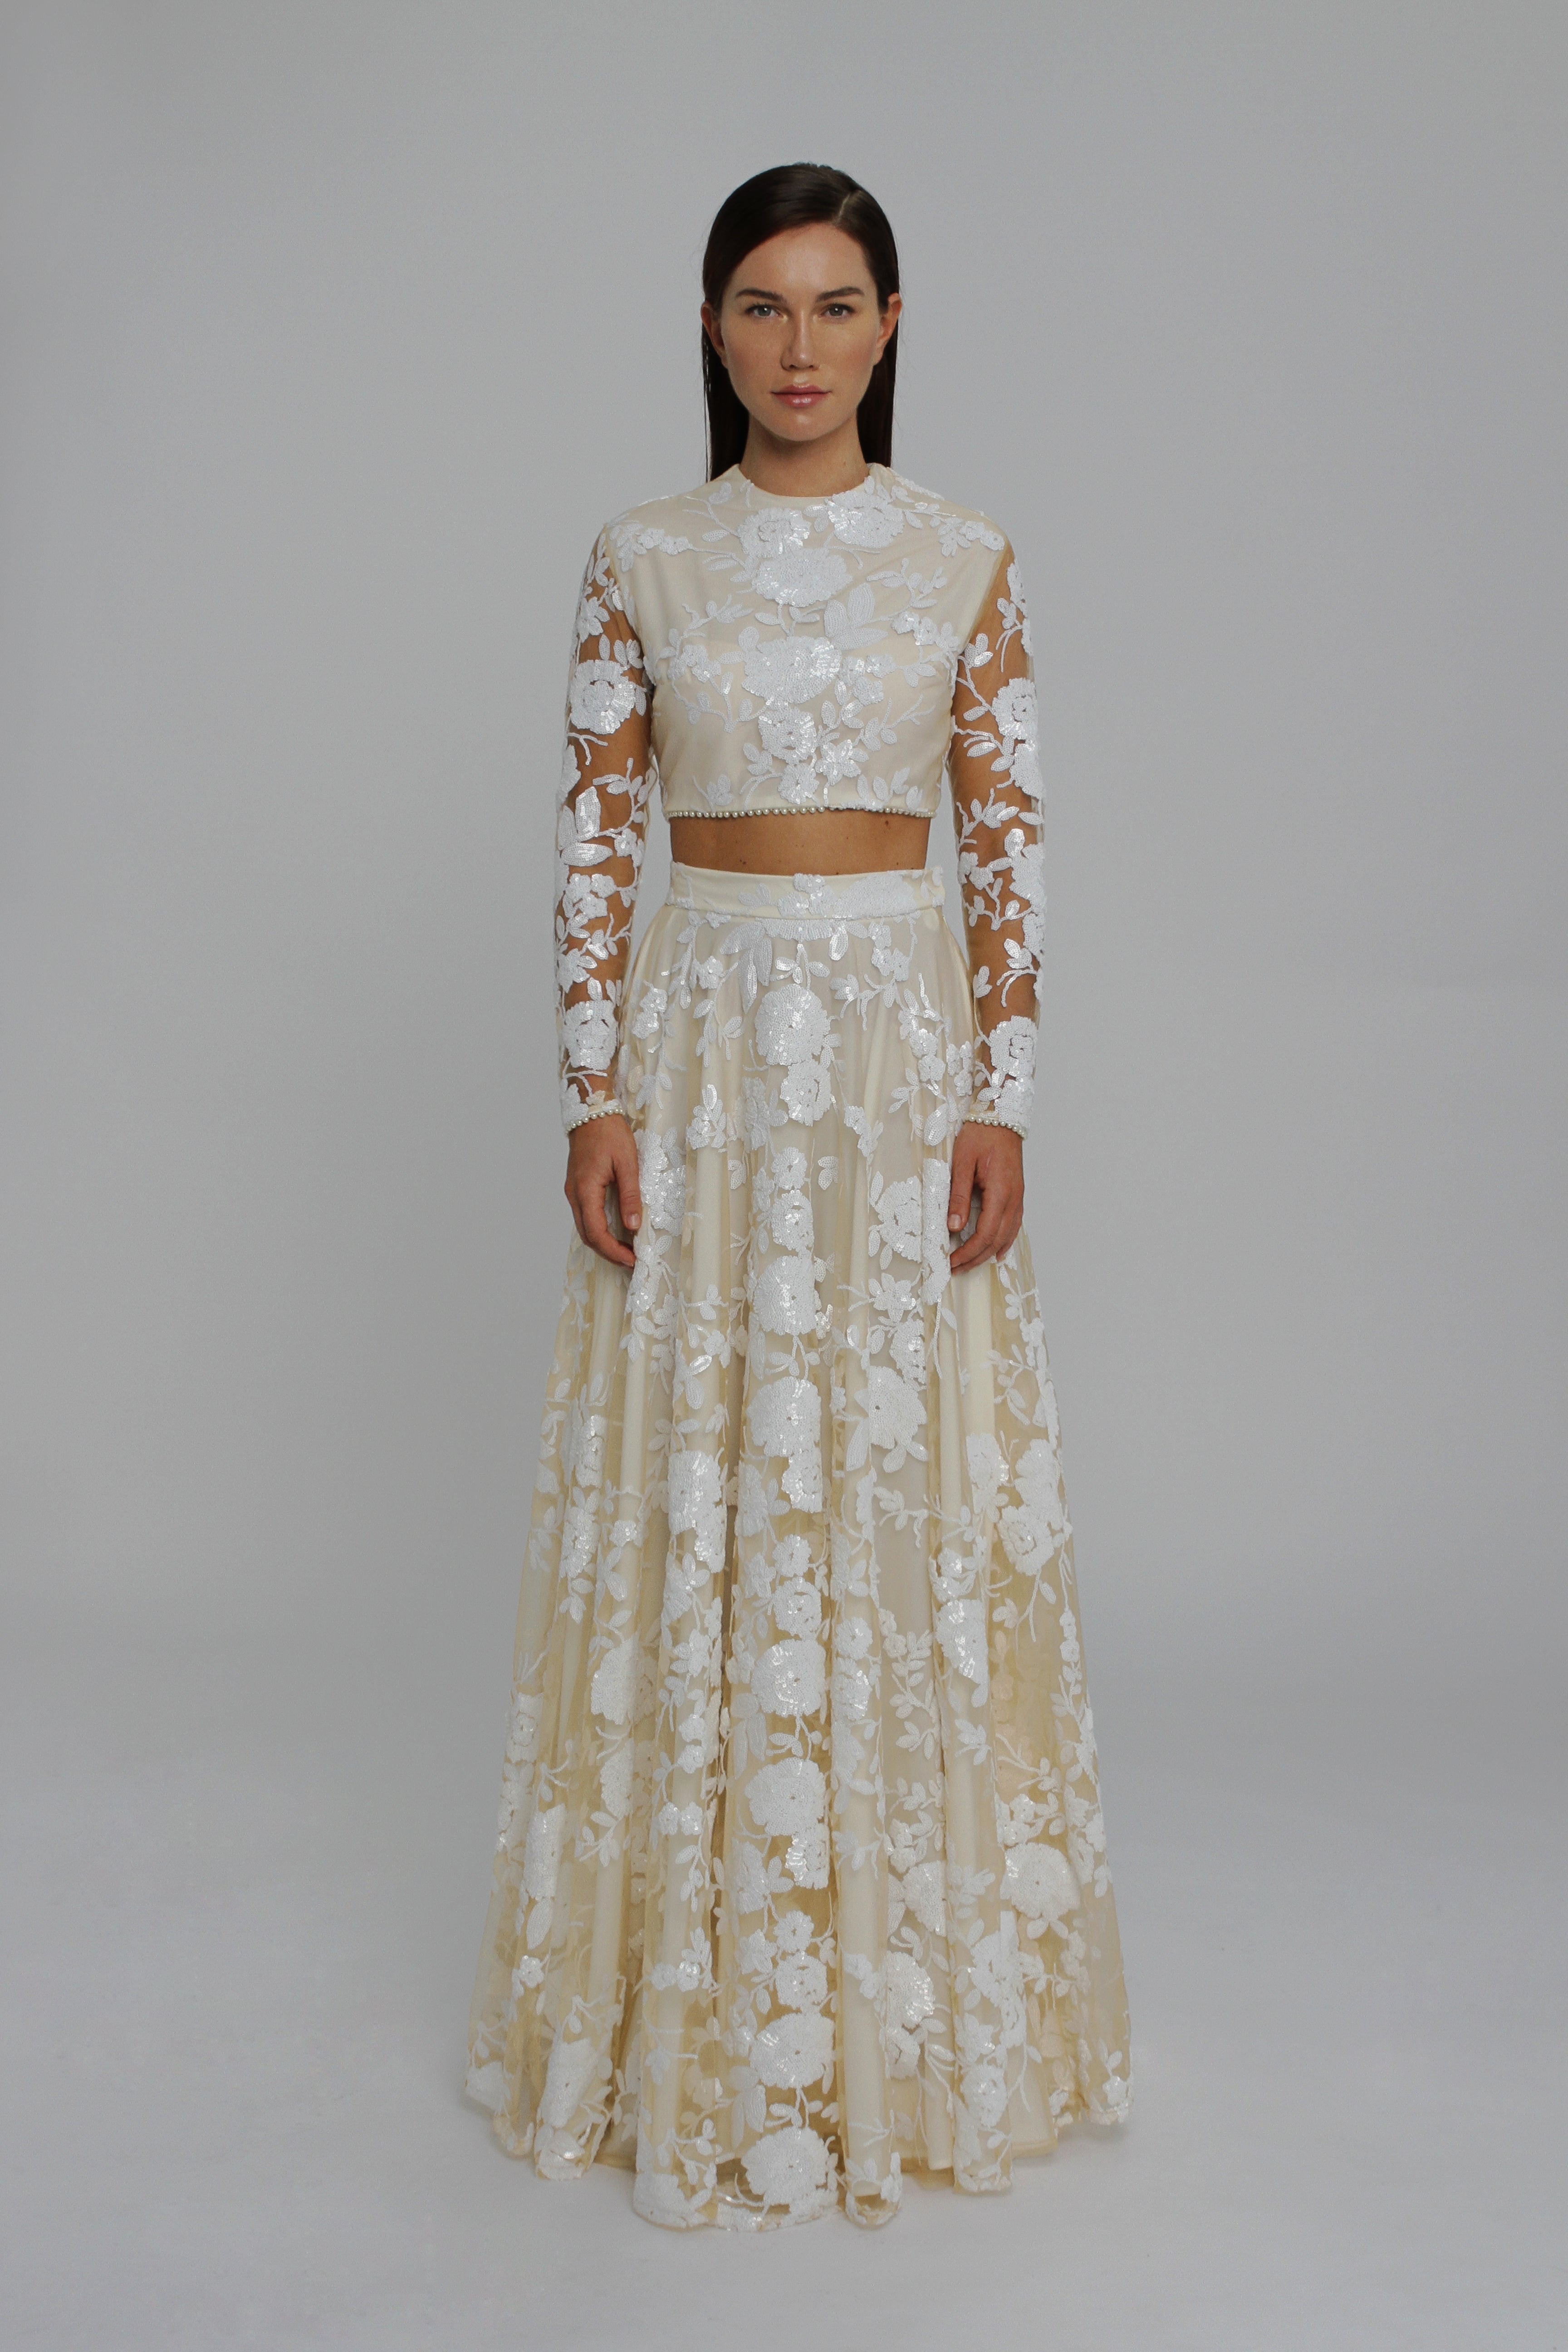 Signature White Rose Sequin Embellished Full Sleeve Top and Evening Skirt Special Event Outfit Pearl Button UME London UK